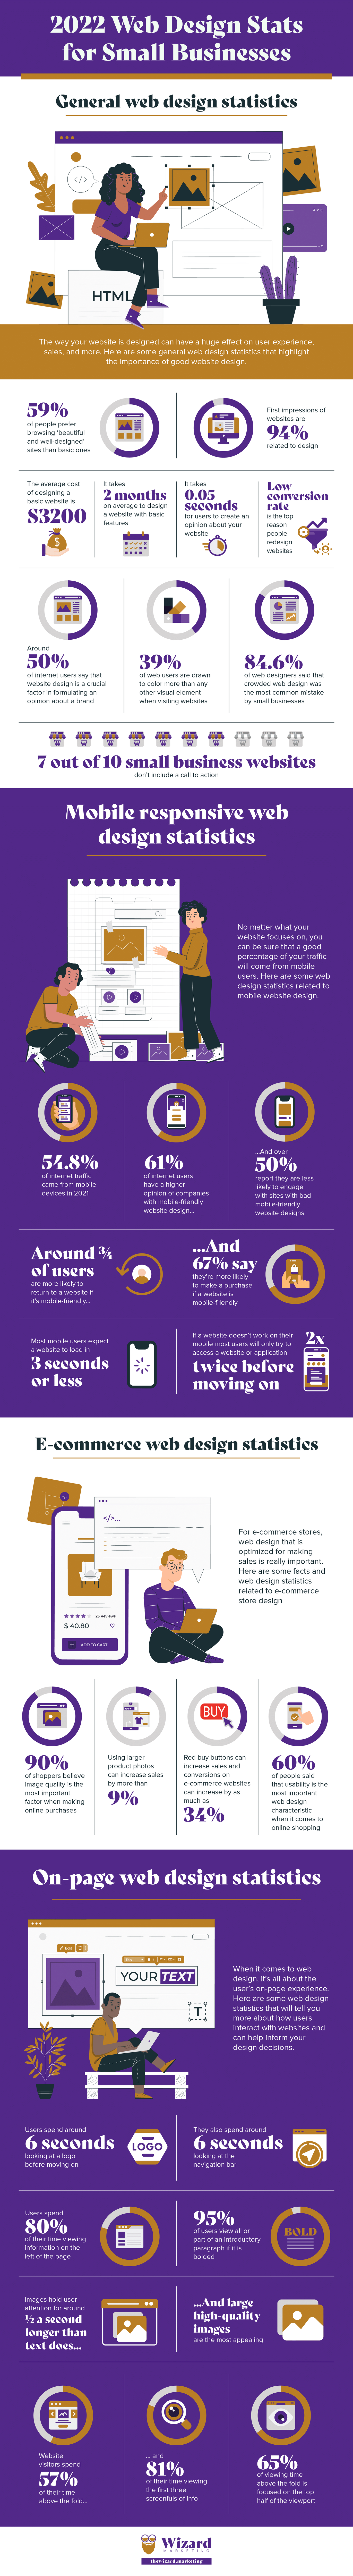 2022 Web Design Stats for Small Businesses [Infographic] at Wizard Marketing 1